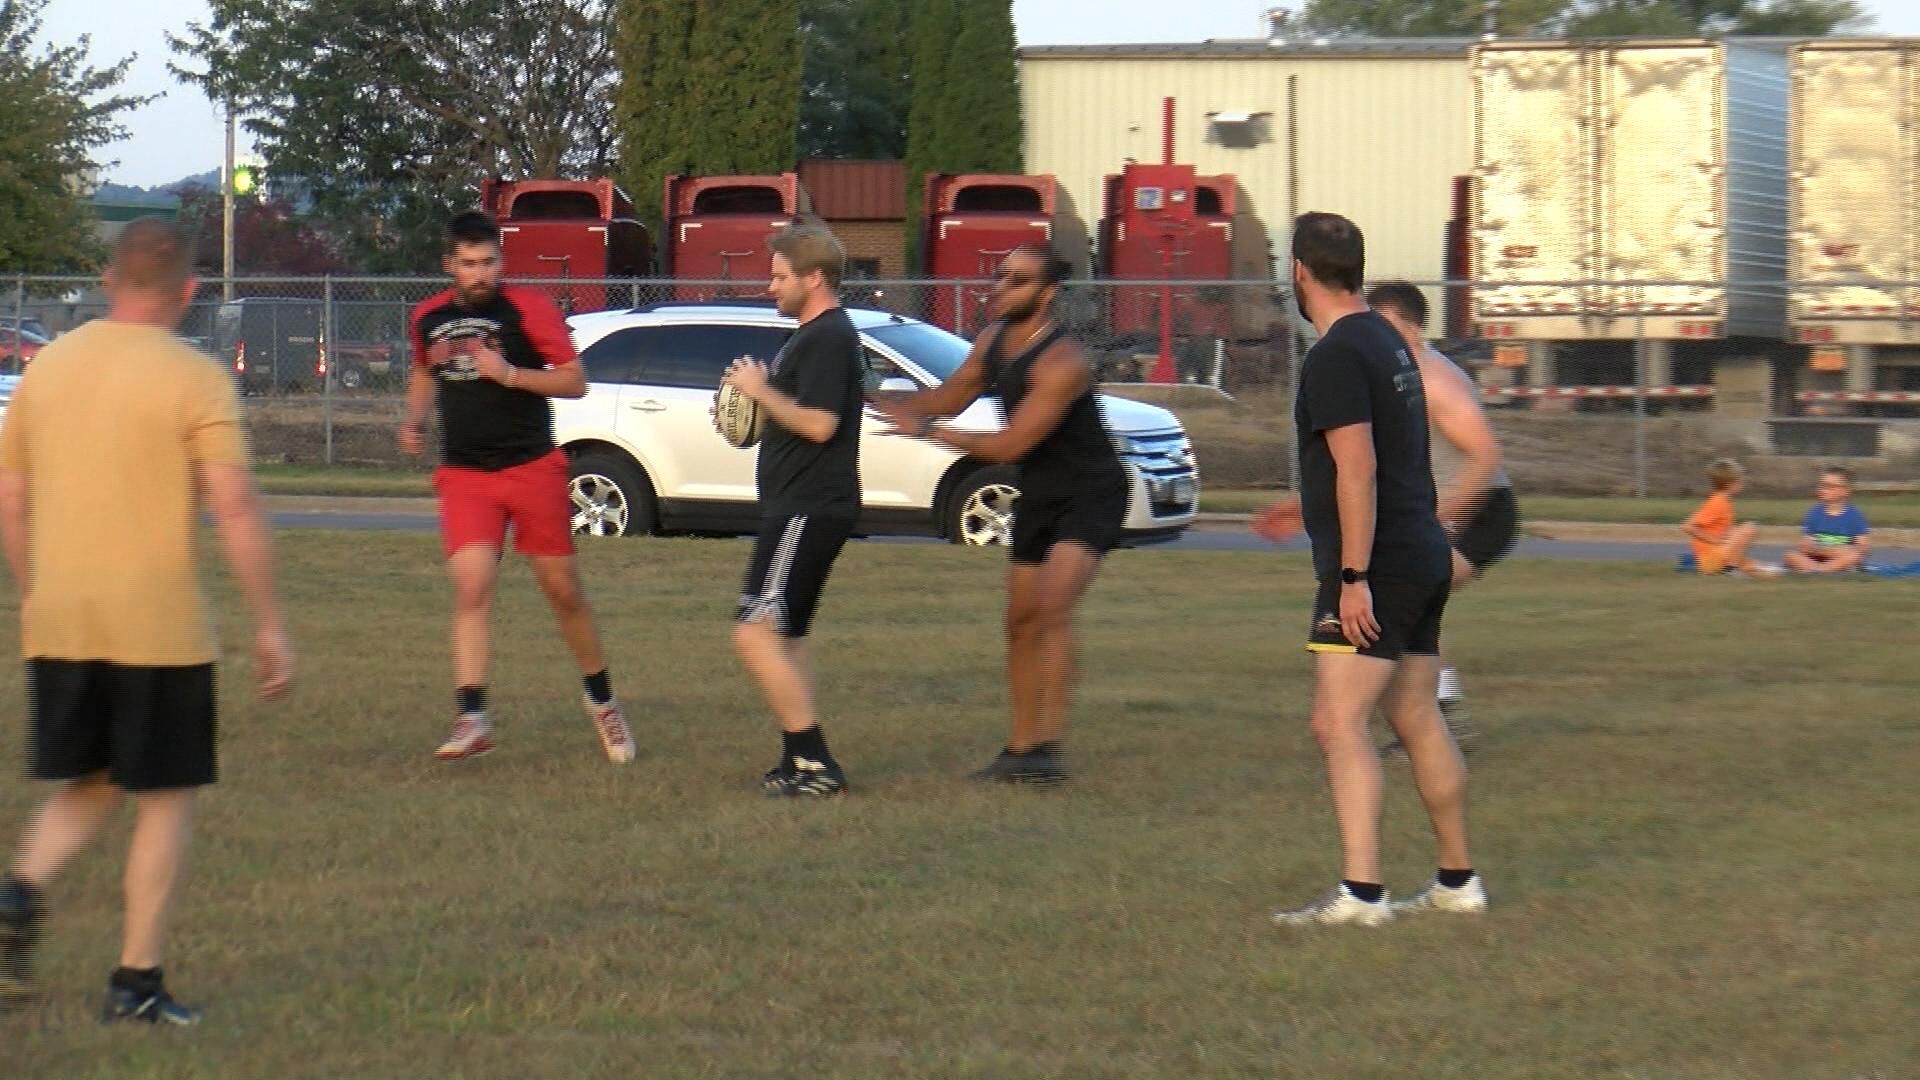 River Rats Rugby Club hoping to introduce others to sport Sports wxow